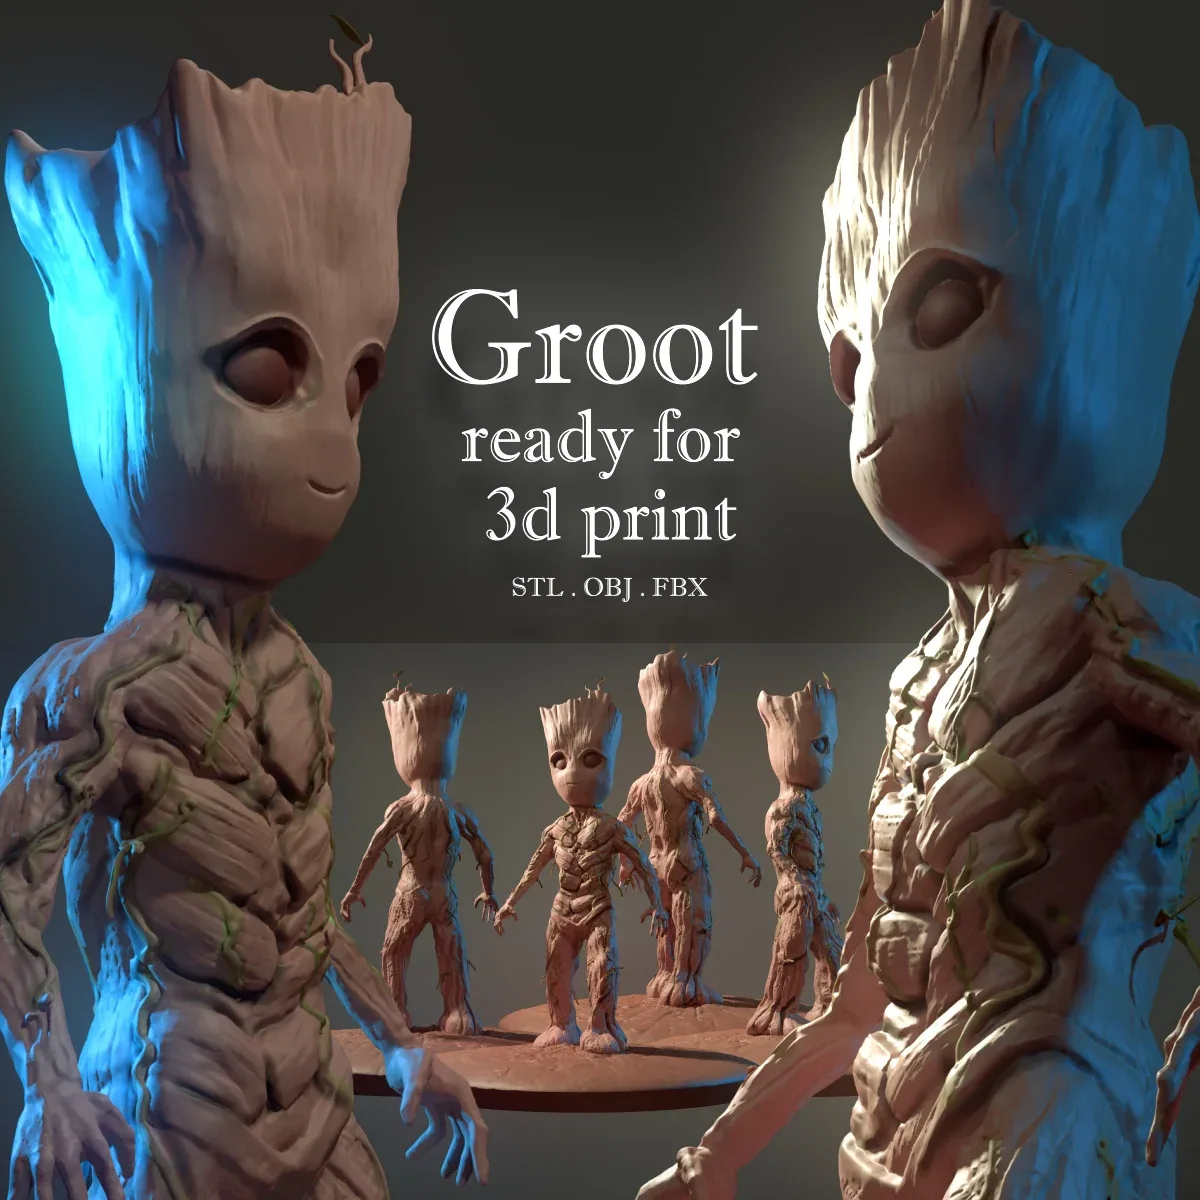 Groot ready for 3d print